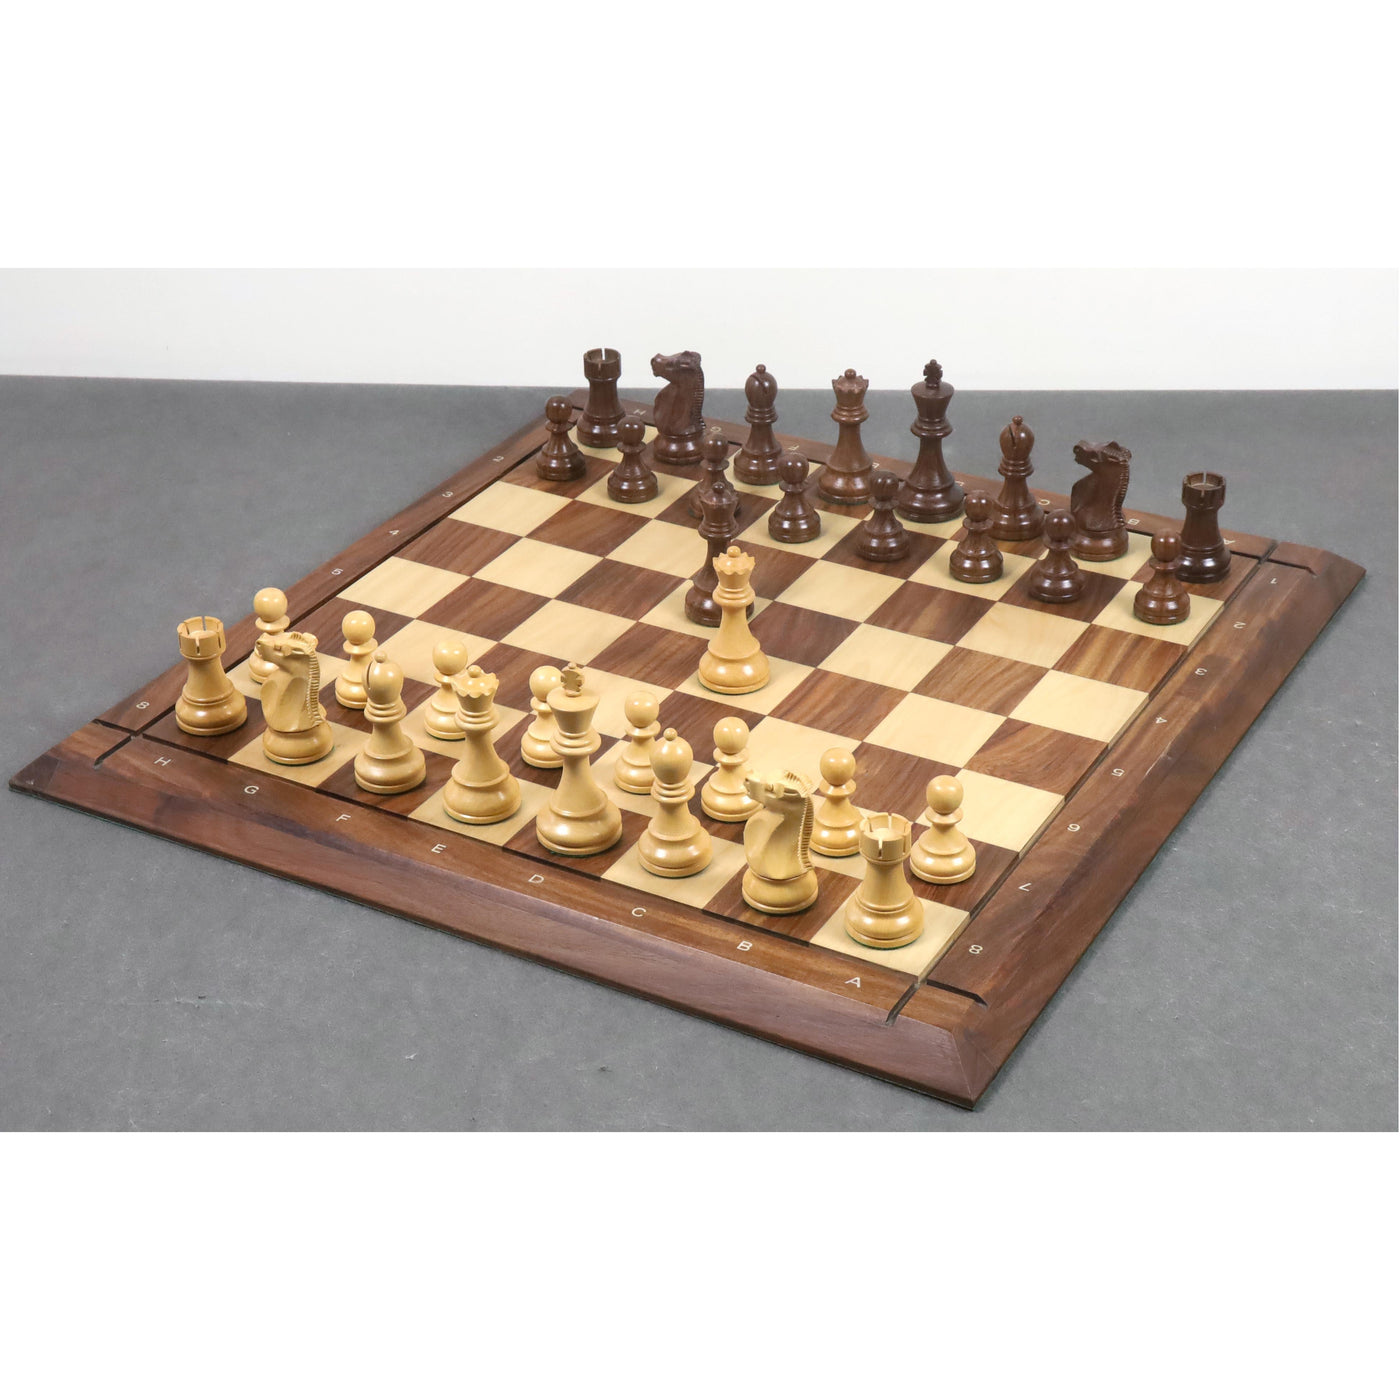 1972 Championship Fischer Spassky Chess Pieces Set | Royalchessmall | Chess Pieces Only